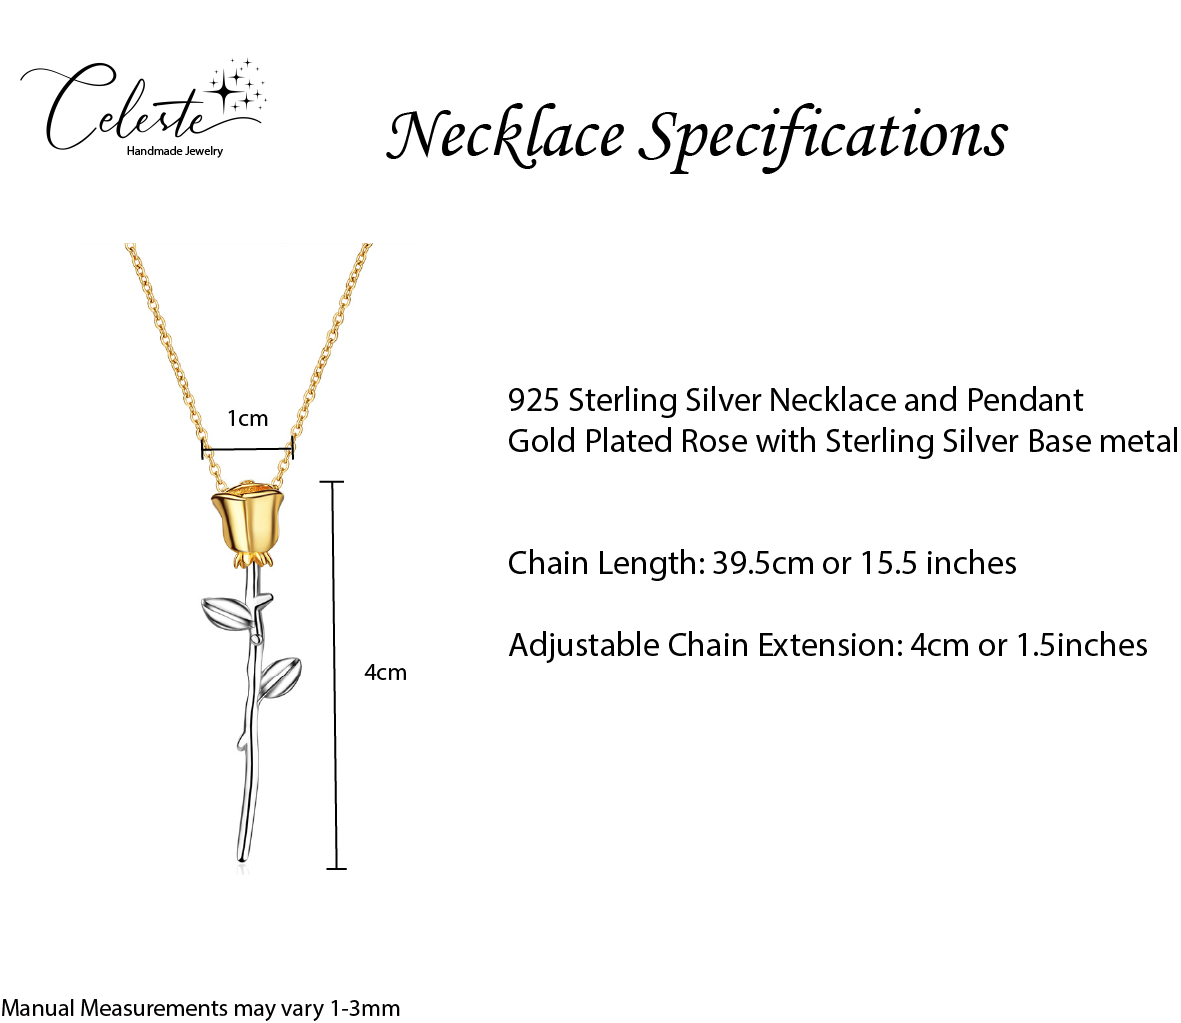 G - Rose Stem Necklace 18K Gold Plated on 925 Sterling Silver Belle Beauty & the Beast Pendant Gift